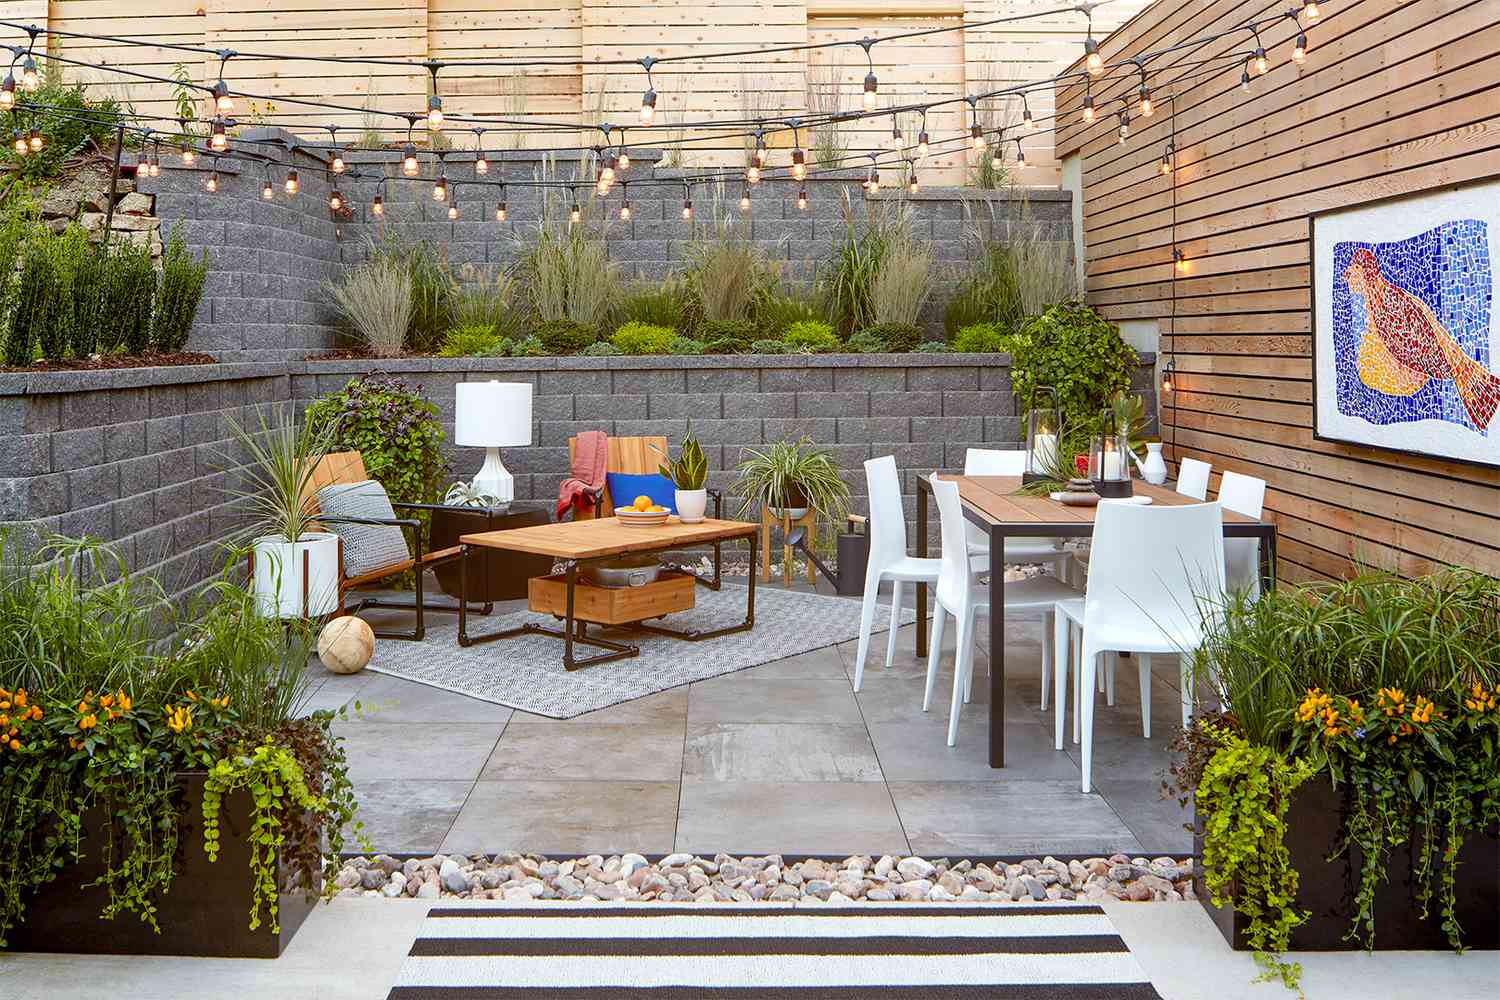 How To Install Poles Hang Outdoor, How To Hang Outdoor String Lights Around Patio